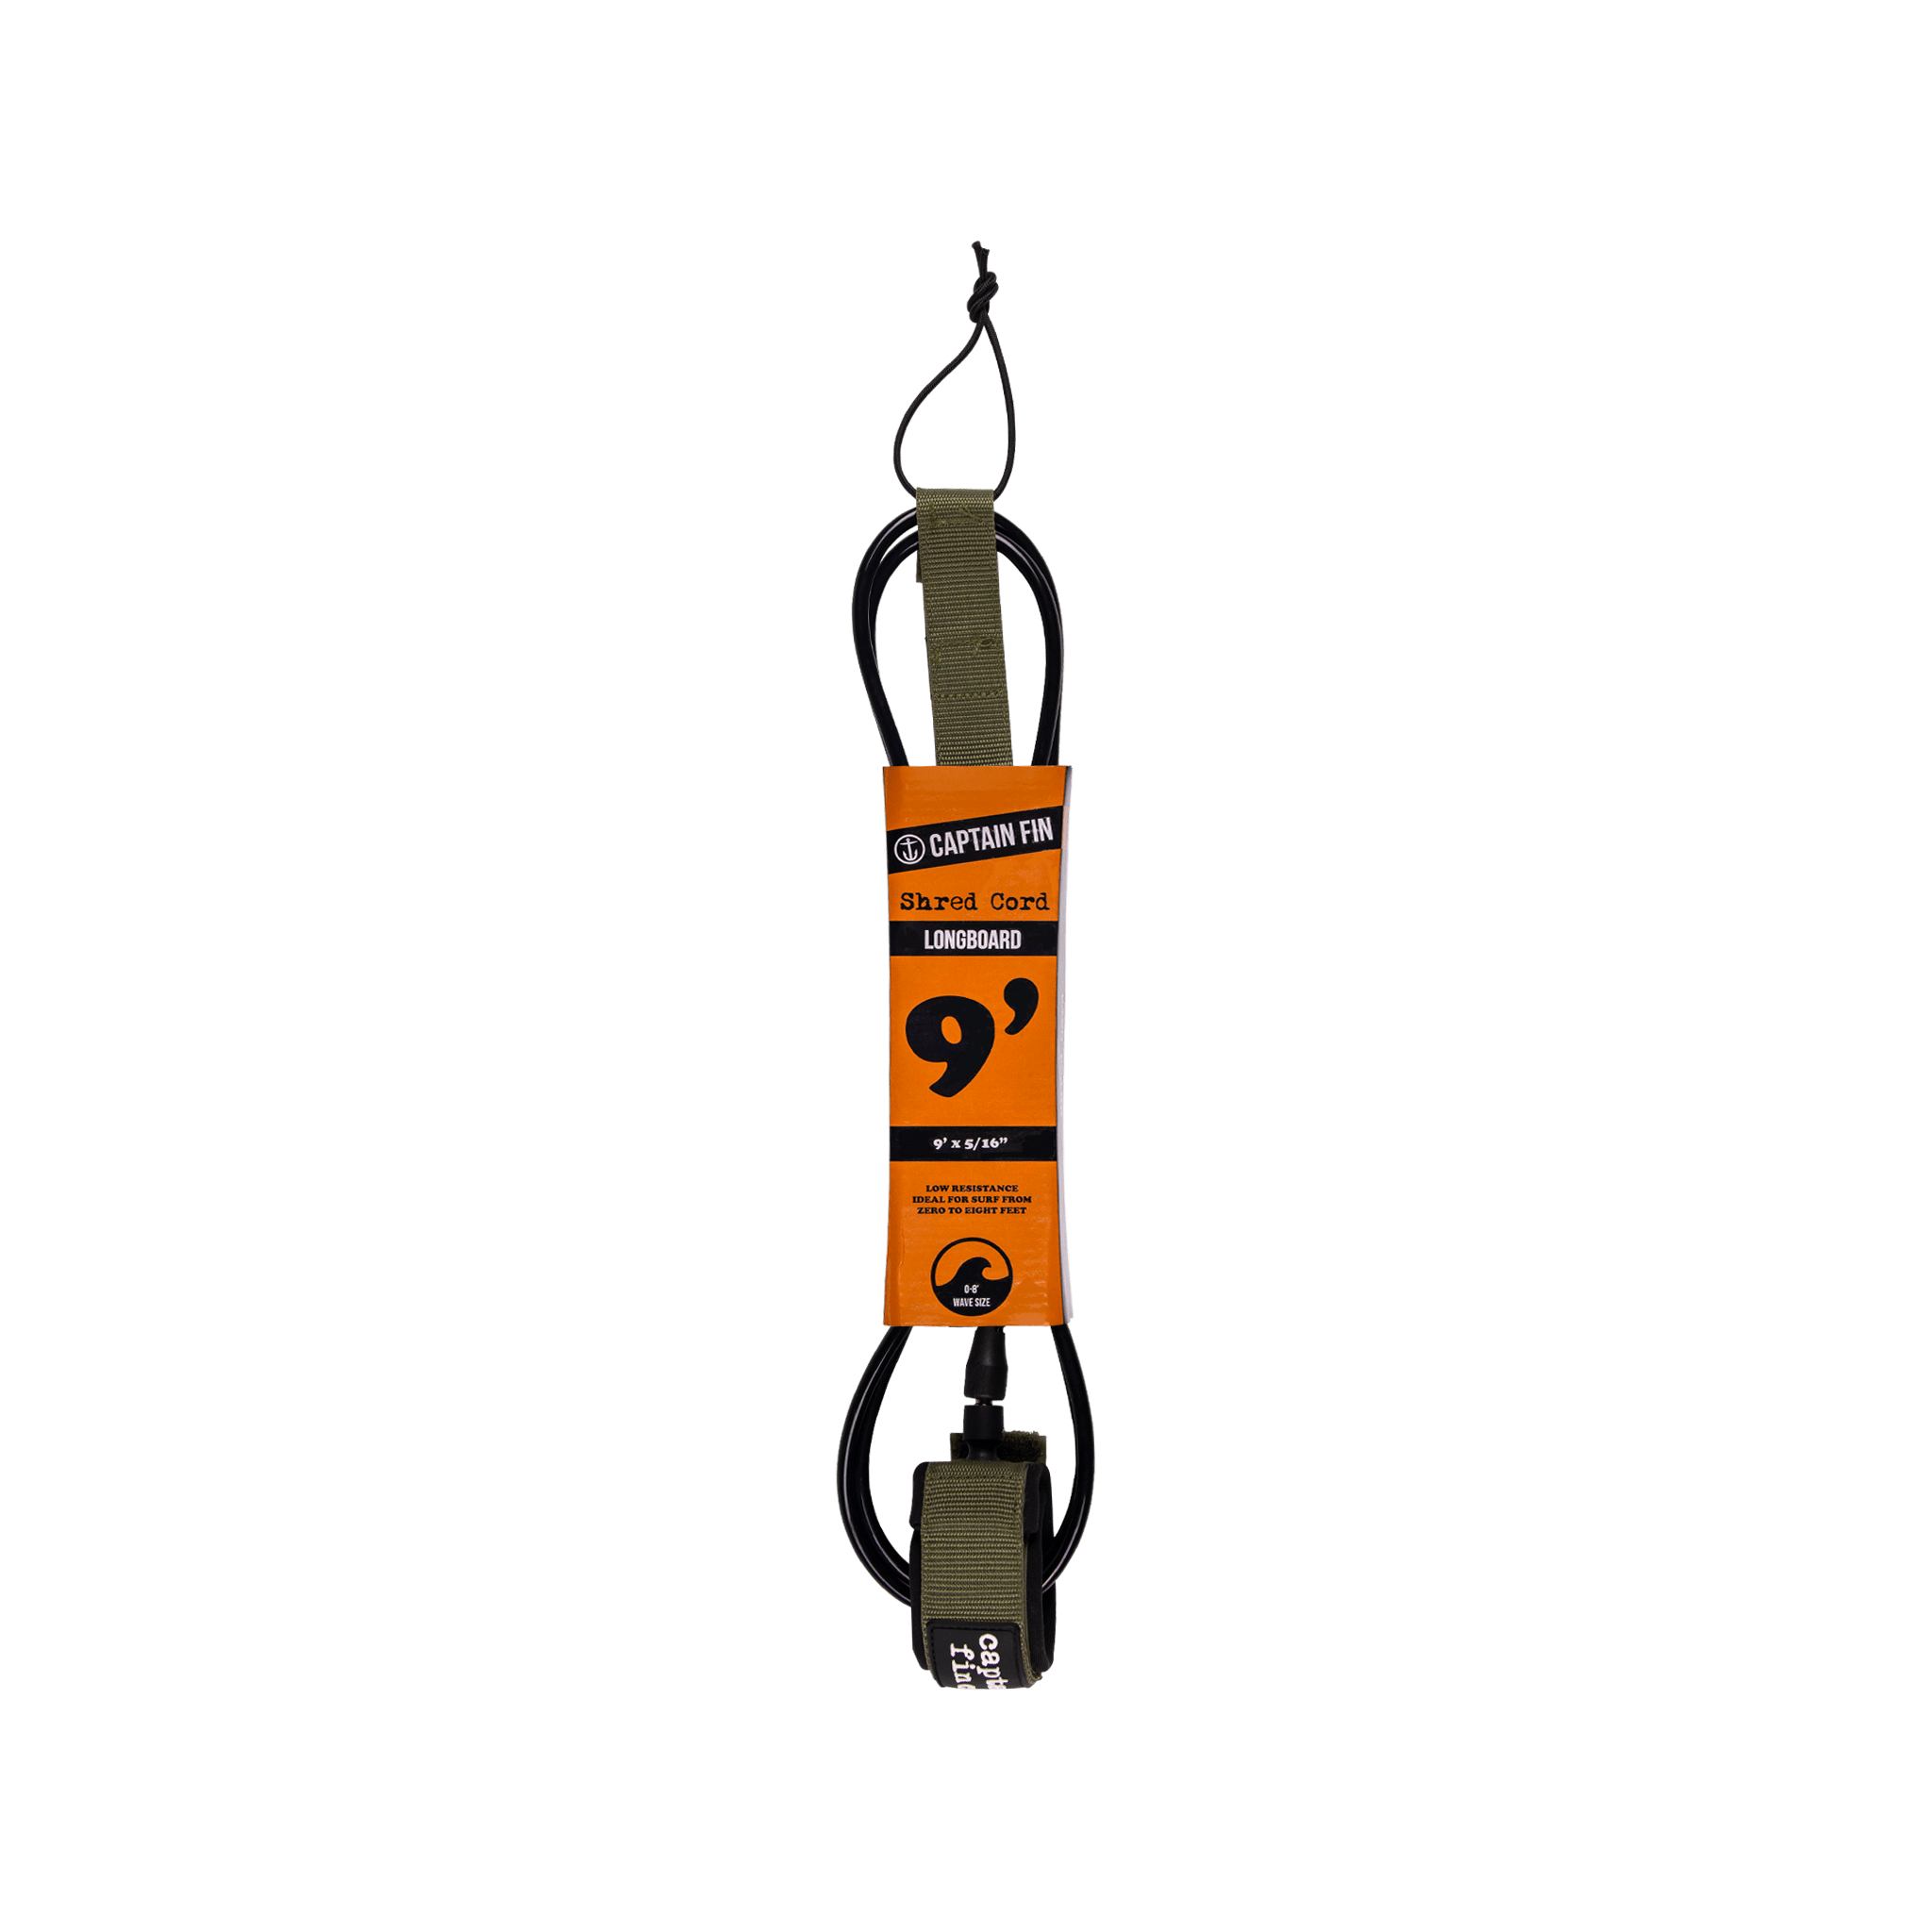 Shred Cord Standard 9ft - Army